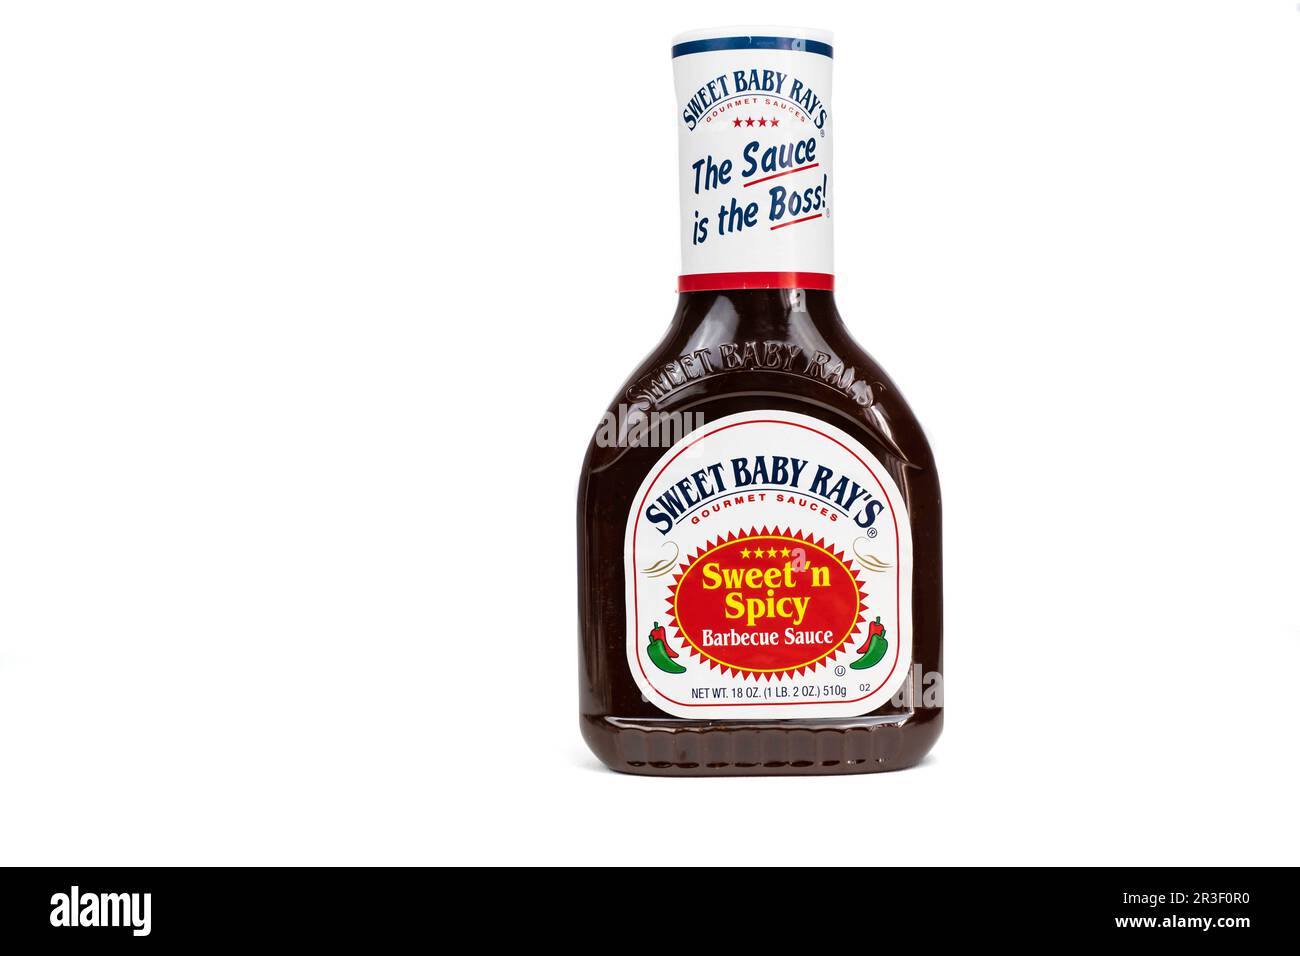 A bottle of Sweet Baby Ray's brand Sweet 'n Spicy Barbecue Sauce on white background. USA. Stock Photo